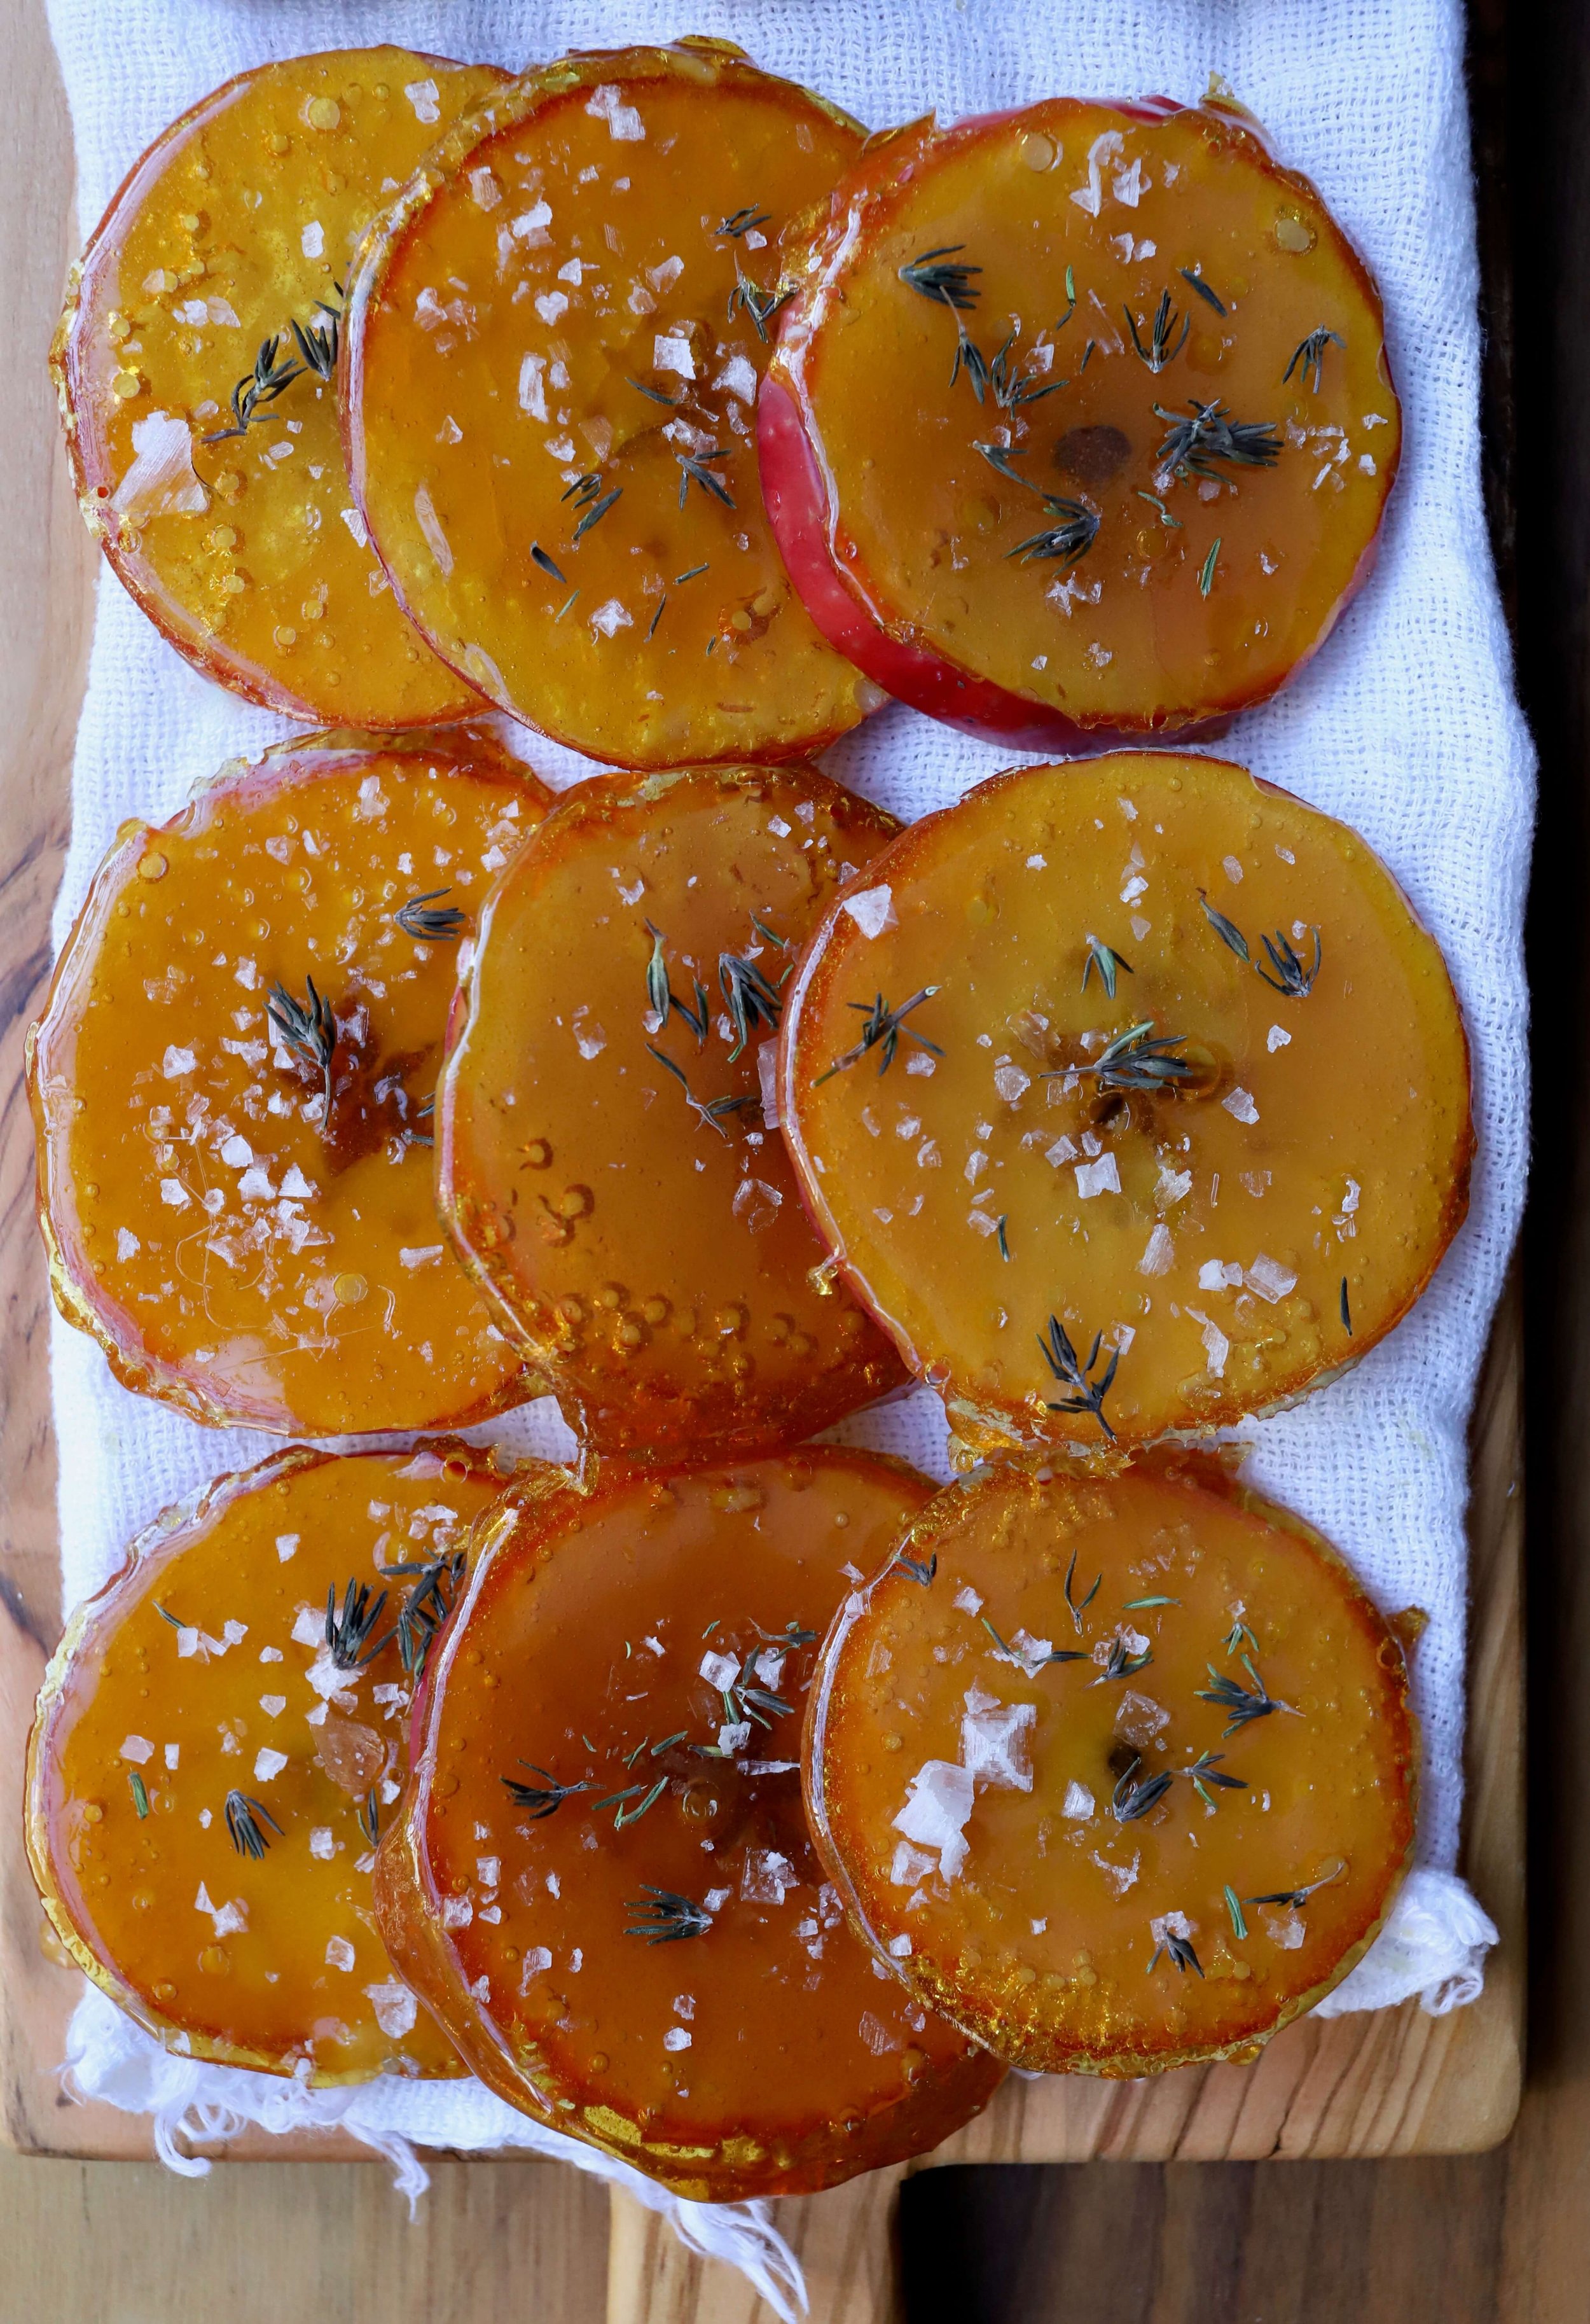 Candied Apple Slices